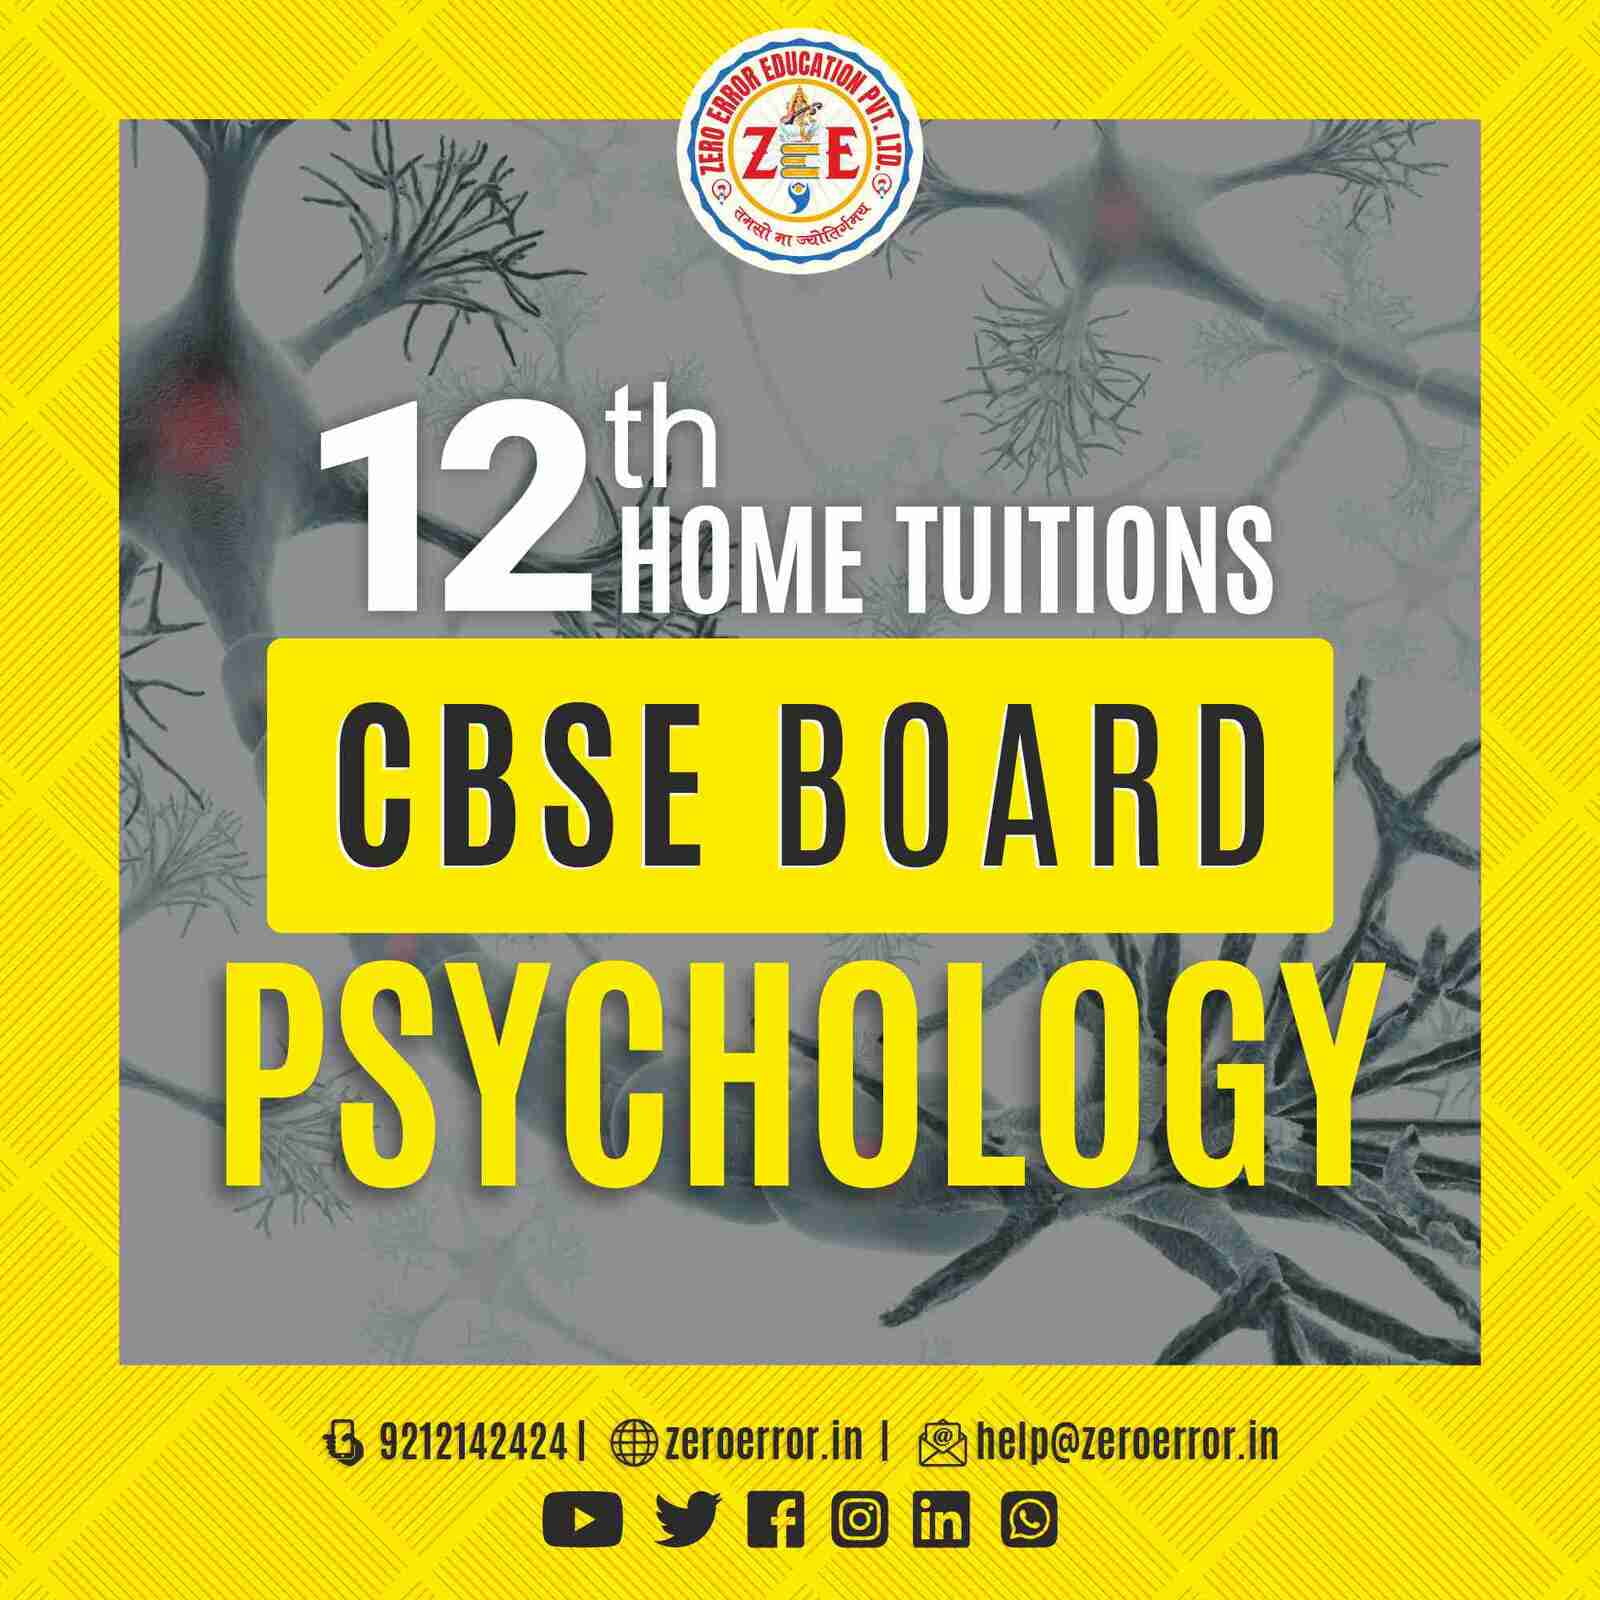 12th Grade CBSE Psychology Online Classes by Zero Error Education Prepare for your CBSE board exams with online and offline Psychology classes for 12th grade. Learn from experienced home tutors and get all the help you need to succeed. Enroll today at Zero Error Education. [https://zeroerror.in/] Call 9212142424 for more information.